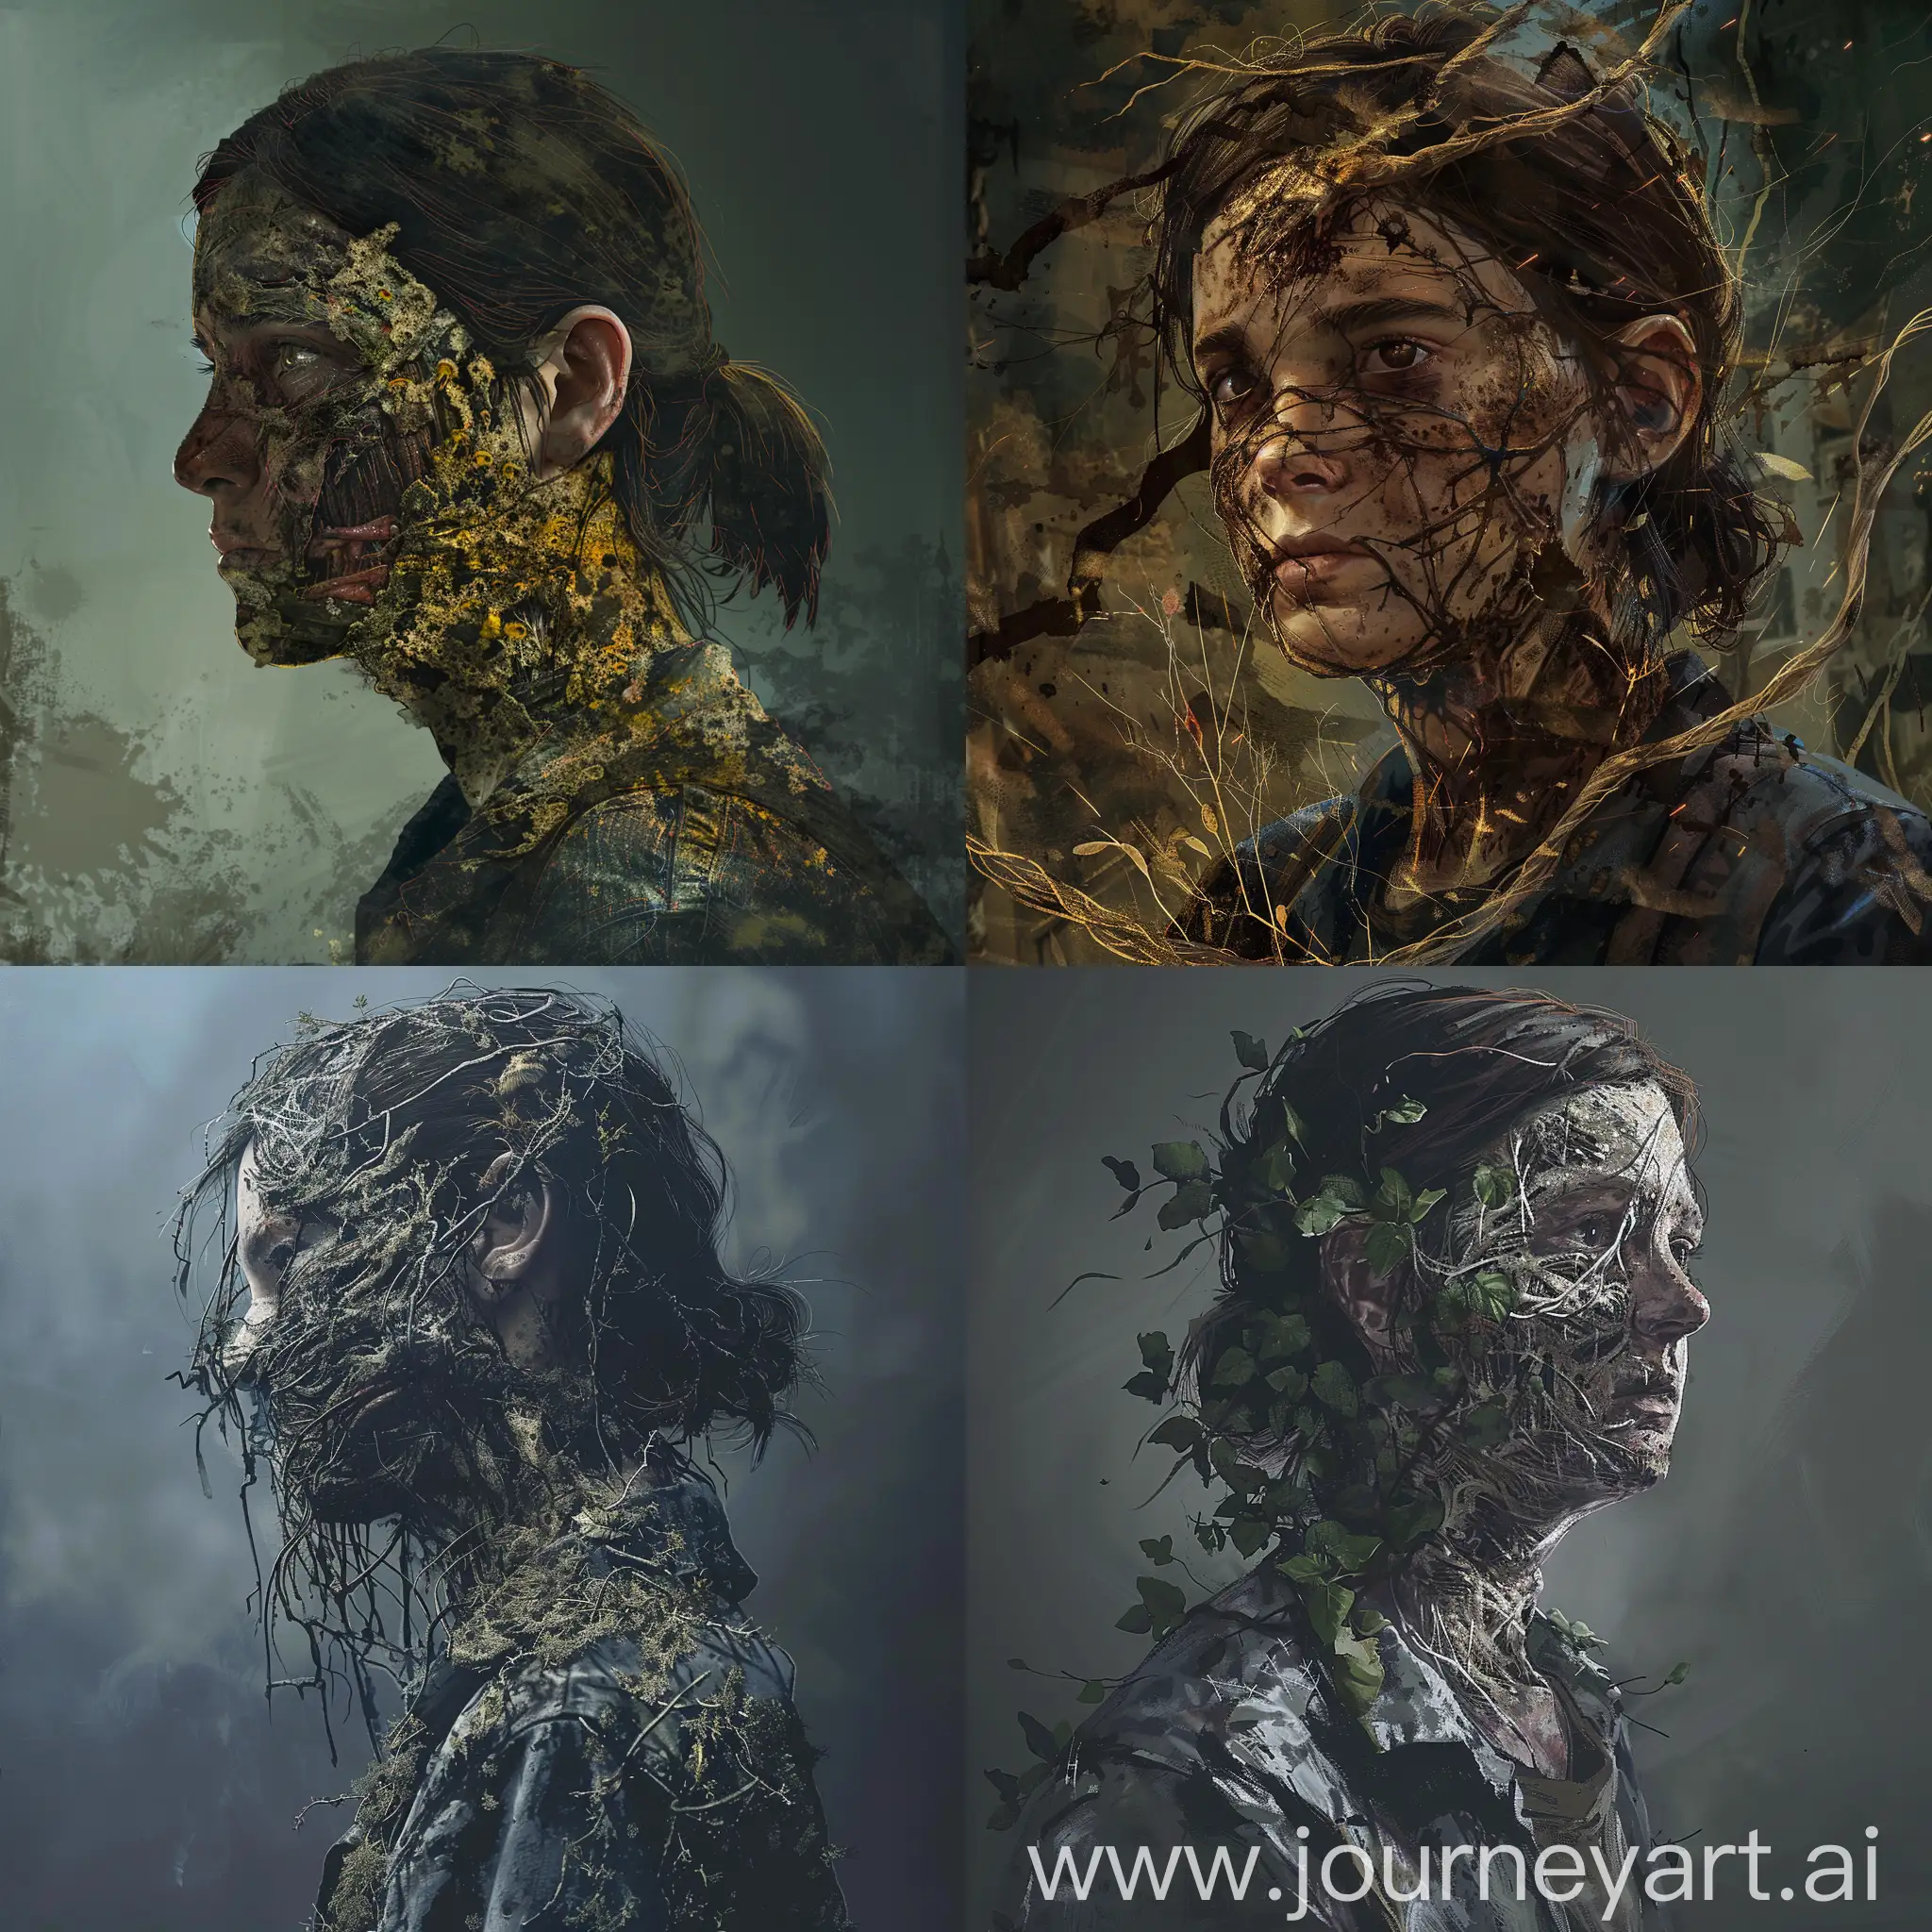 "Create a haunting portrait of a character from 'The Last of Us' universe, transformed by the eerie fungal infection, capturing the unsettling blend of human and fungal features with a focus on conveying the terror and despair of their existence."